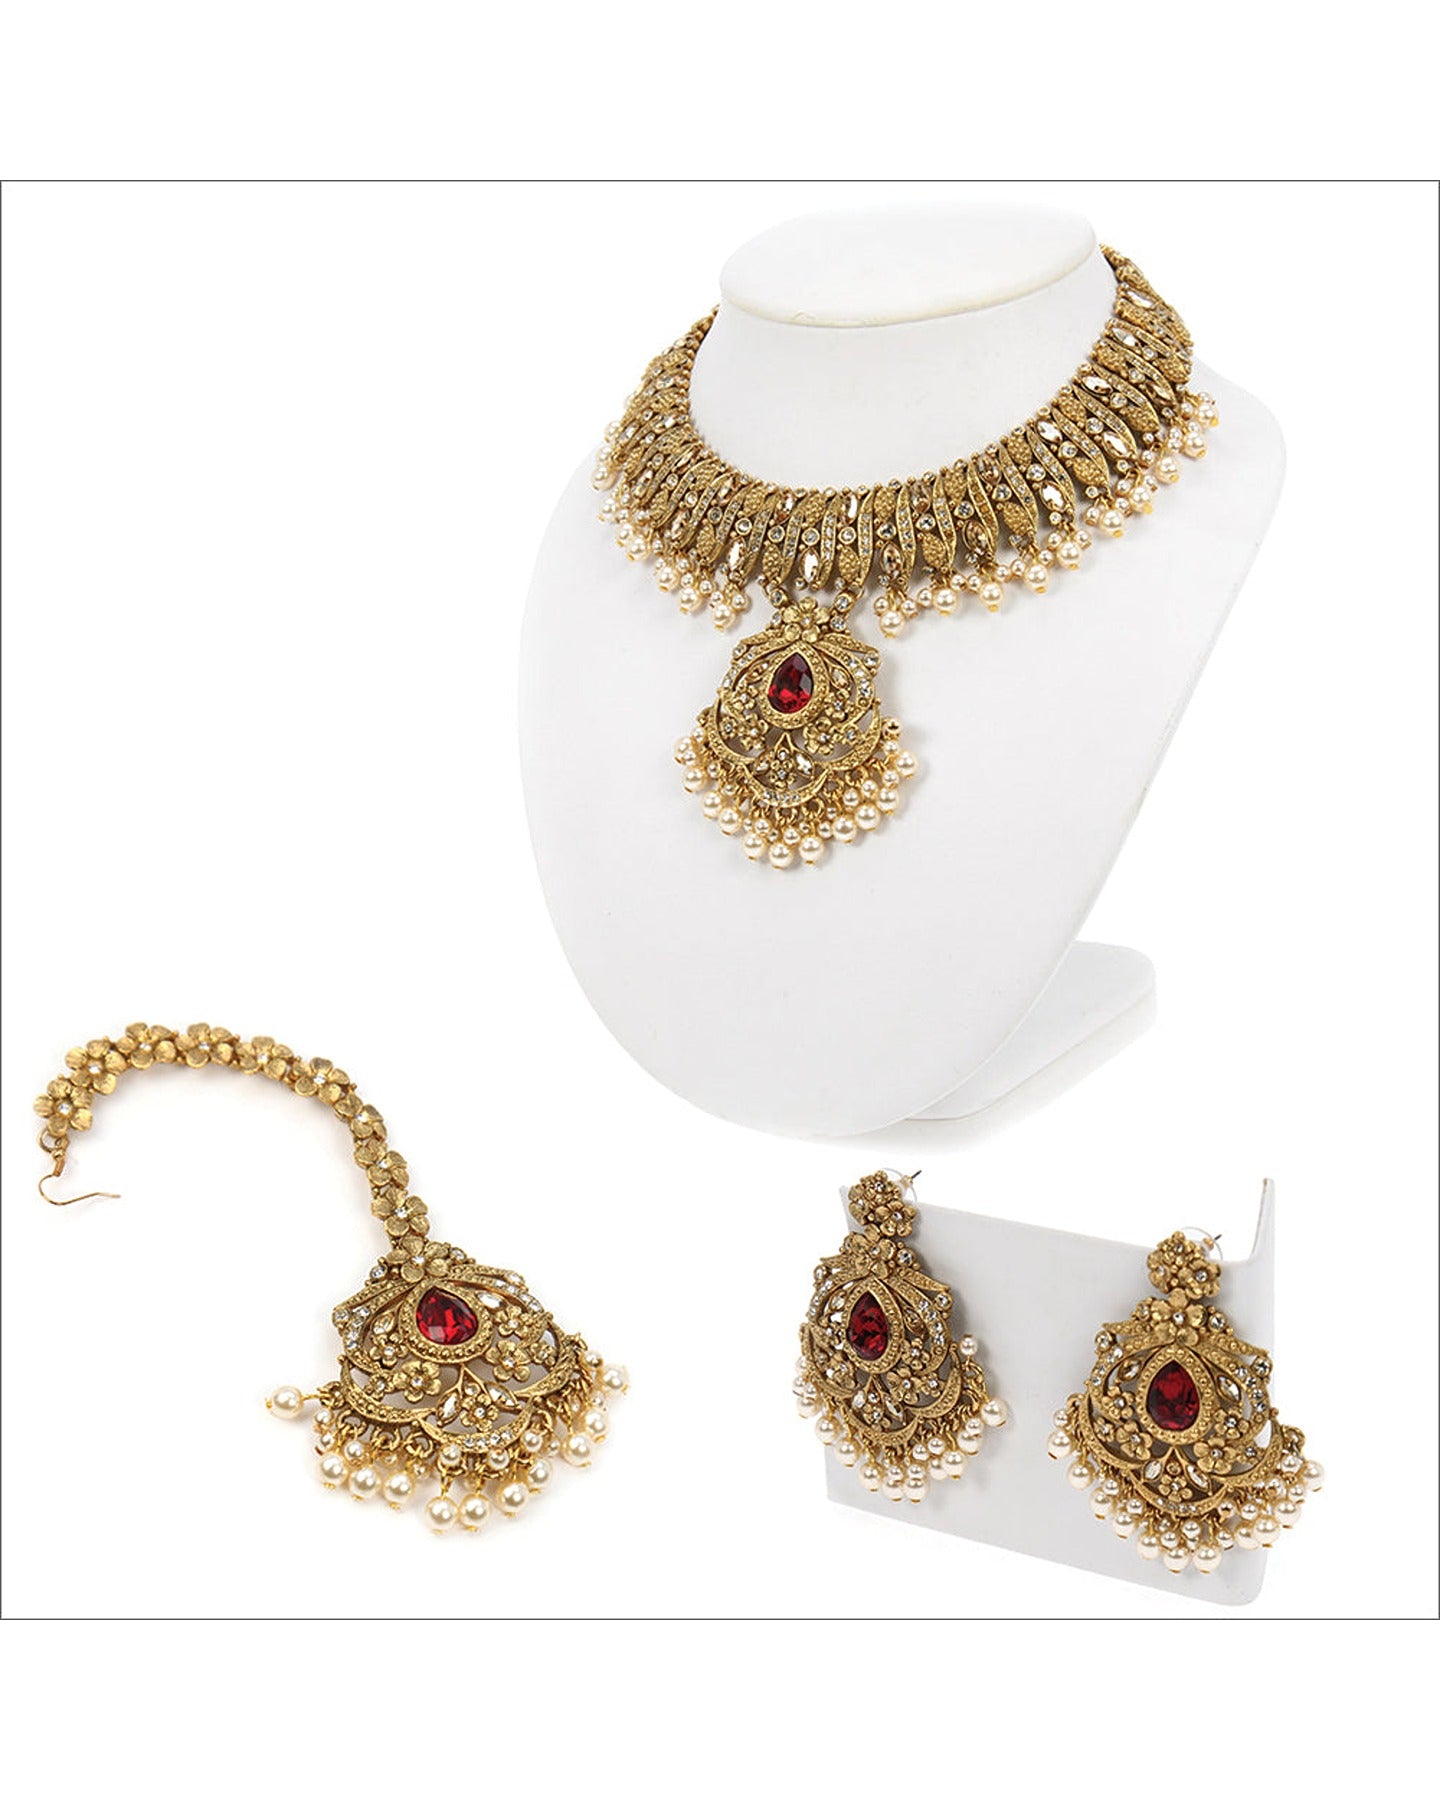 Immerse yourself in the opulence of our Antique Gold jewelry adorned with striking Siam Red stones and the radiant sparkle of Crystal Golden Shadow. This captivating collection seamlessly blends the warm tones of Antique Gold with the bold allure of Siam Red and the enchanting hues of Crystal Golden Shadow, creating an ensemble that exudes sophistication and timeless charm.